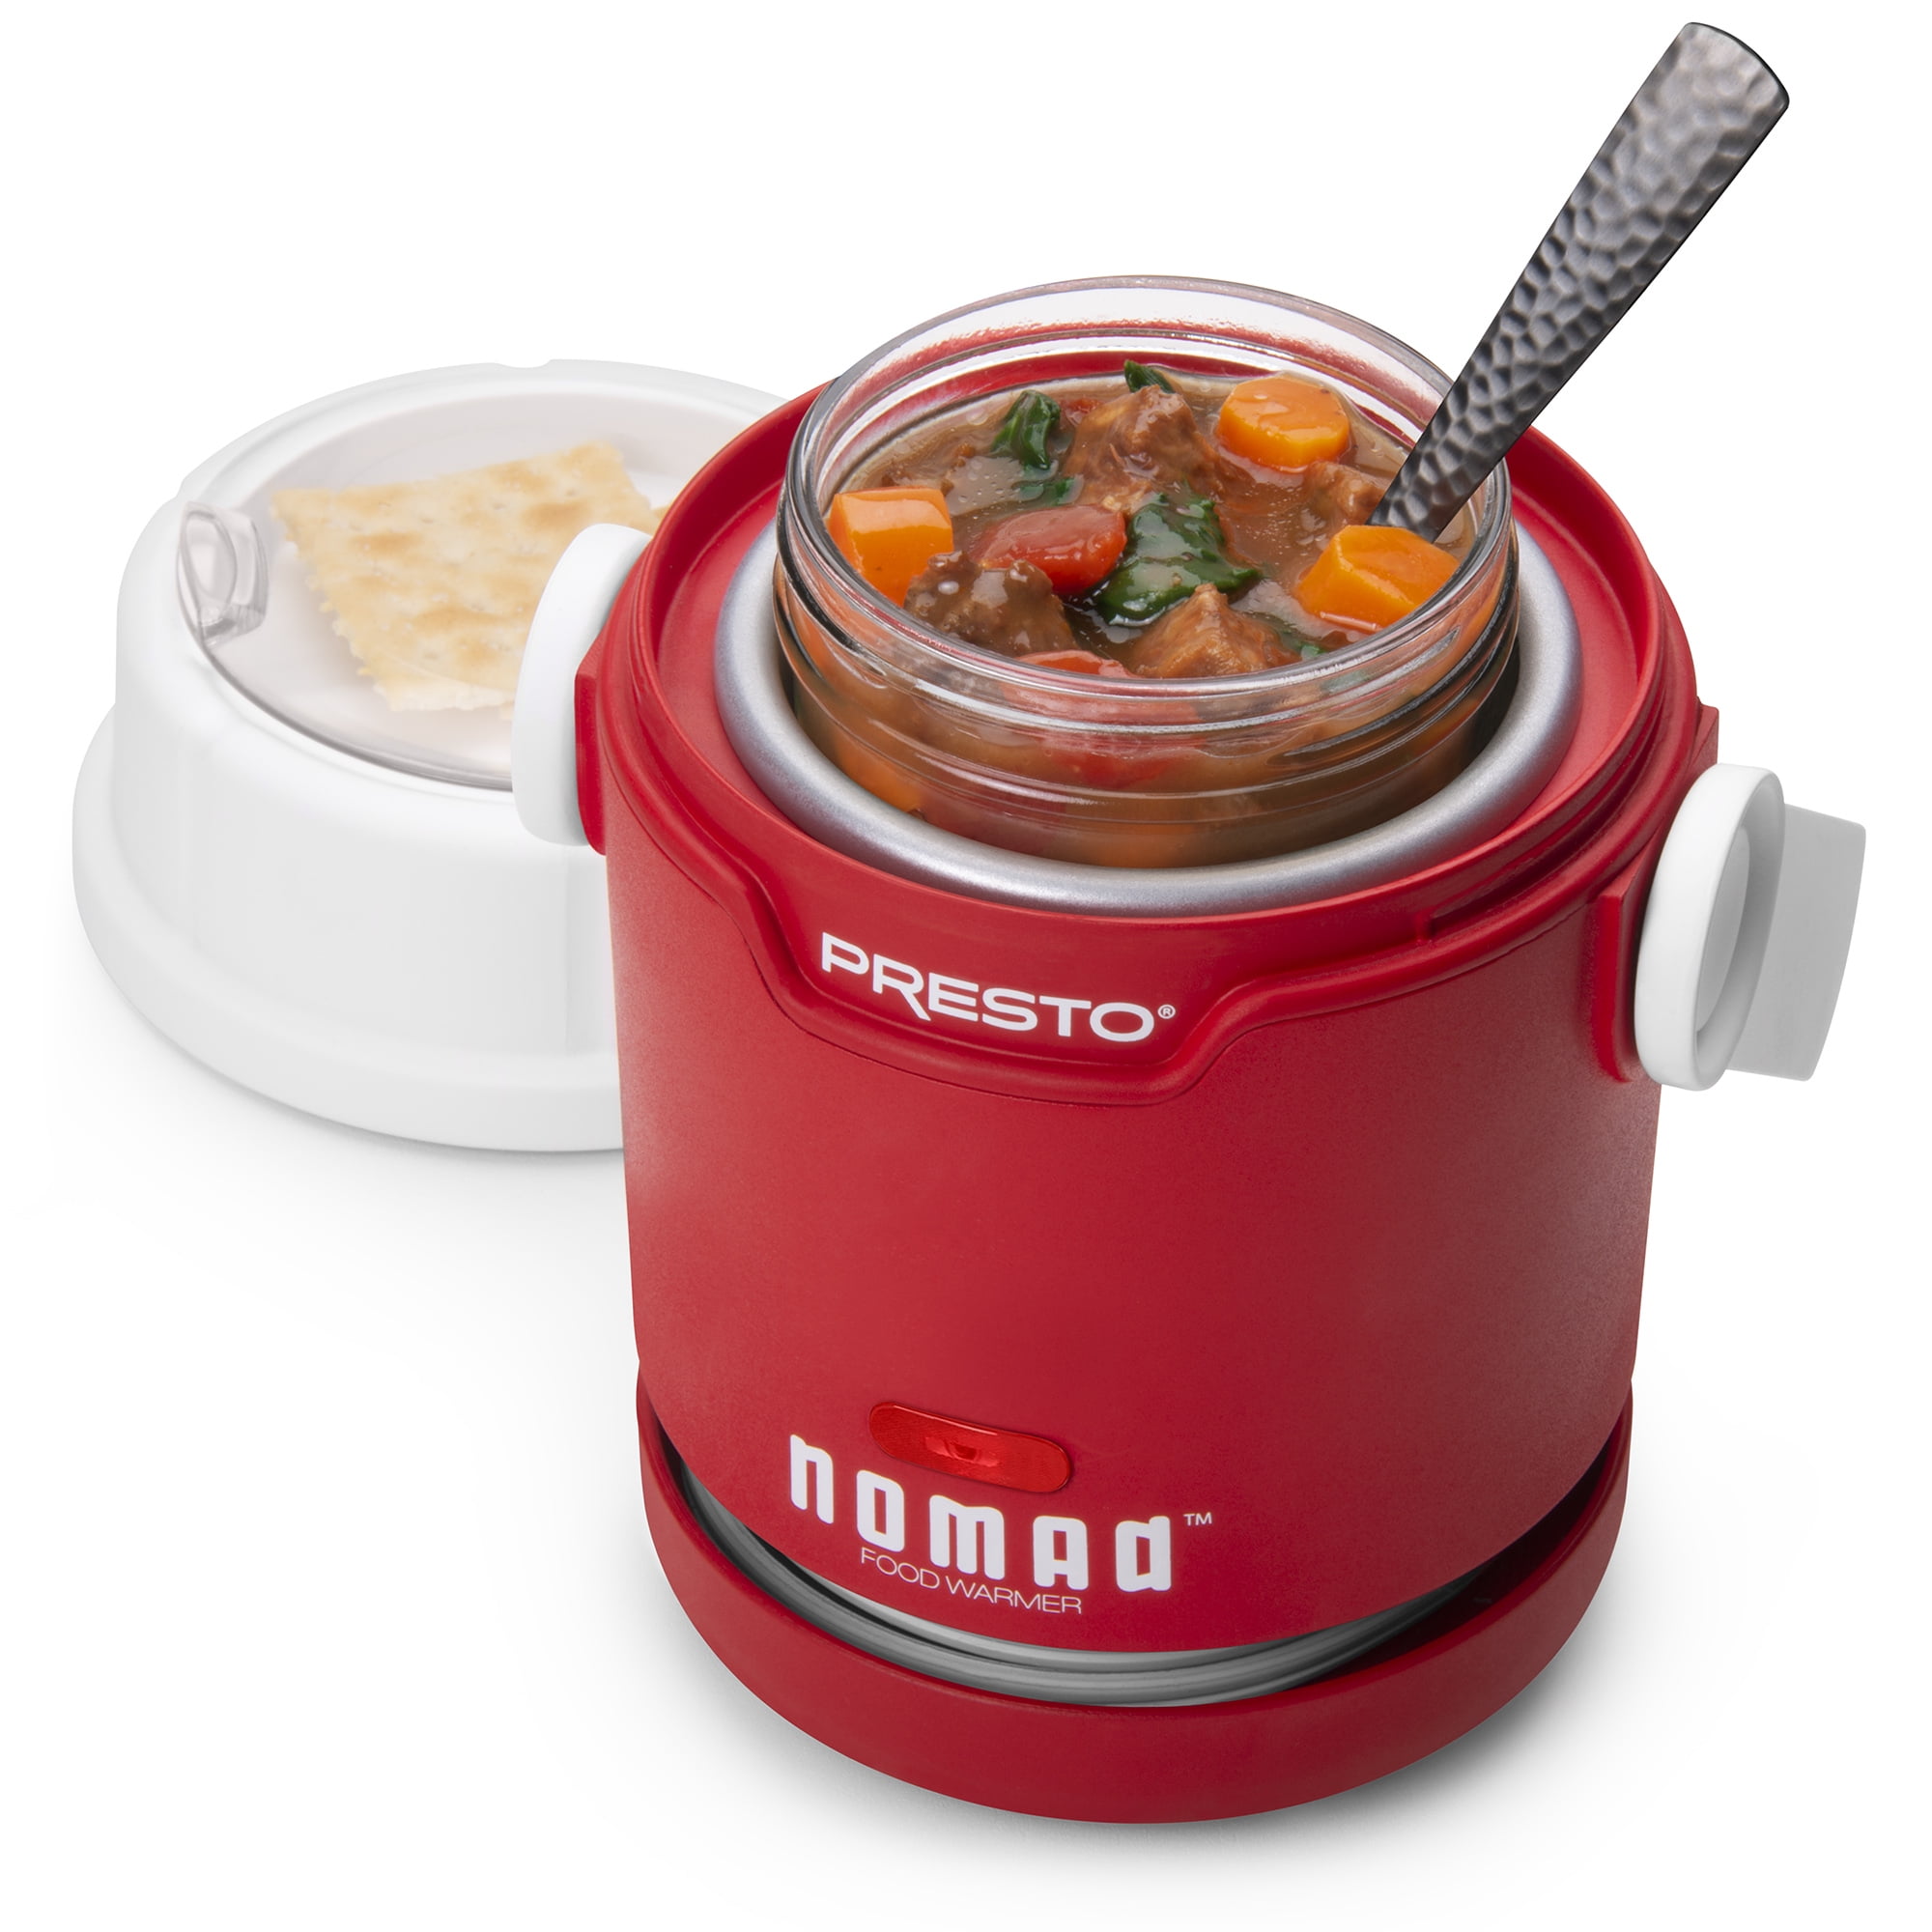  Presto 6011 Slow Cooker, 7.4 x 12.5 x 15.9, Red & 06015 Nomad  Mason Jar Traveling Food Warmer, 1 Pint, Red: Home & Kitchen